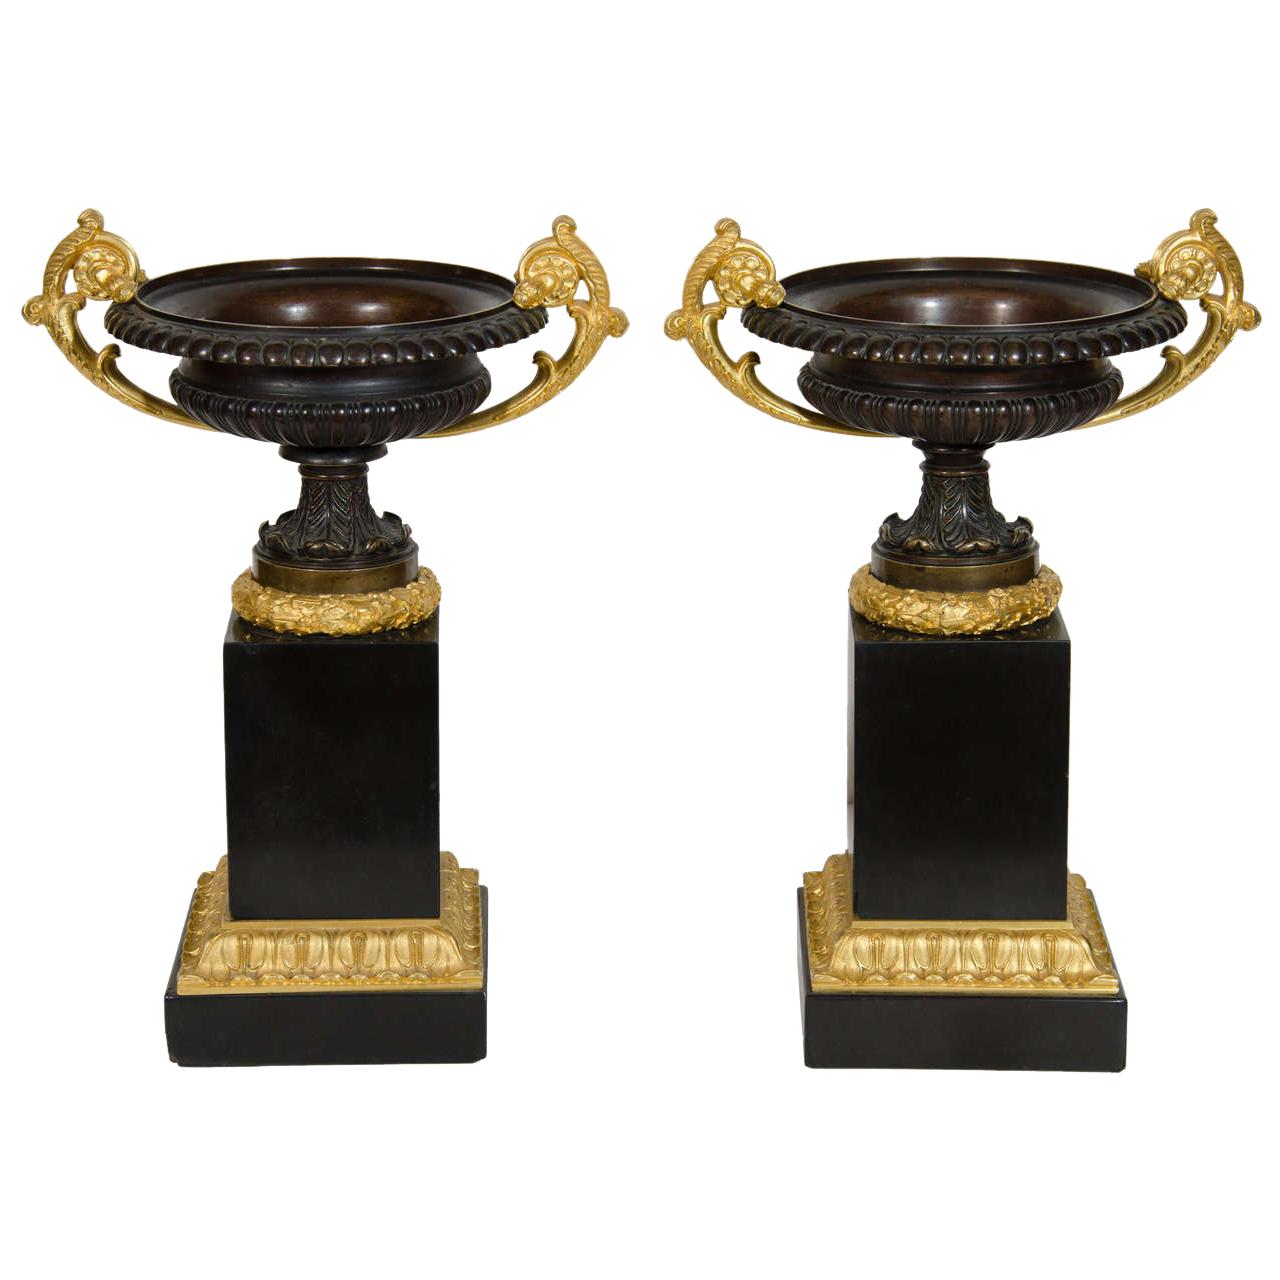 Pair of Fine Antique French Empire Gilt Bronze and Patina Bronze Urns